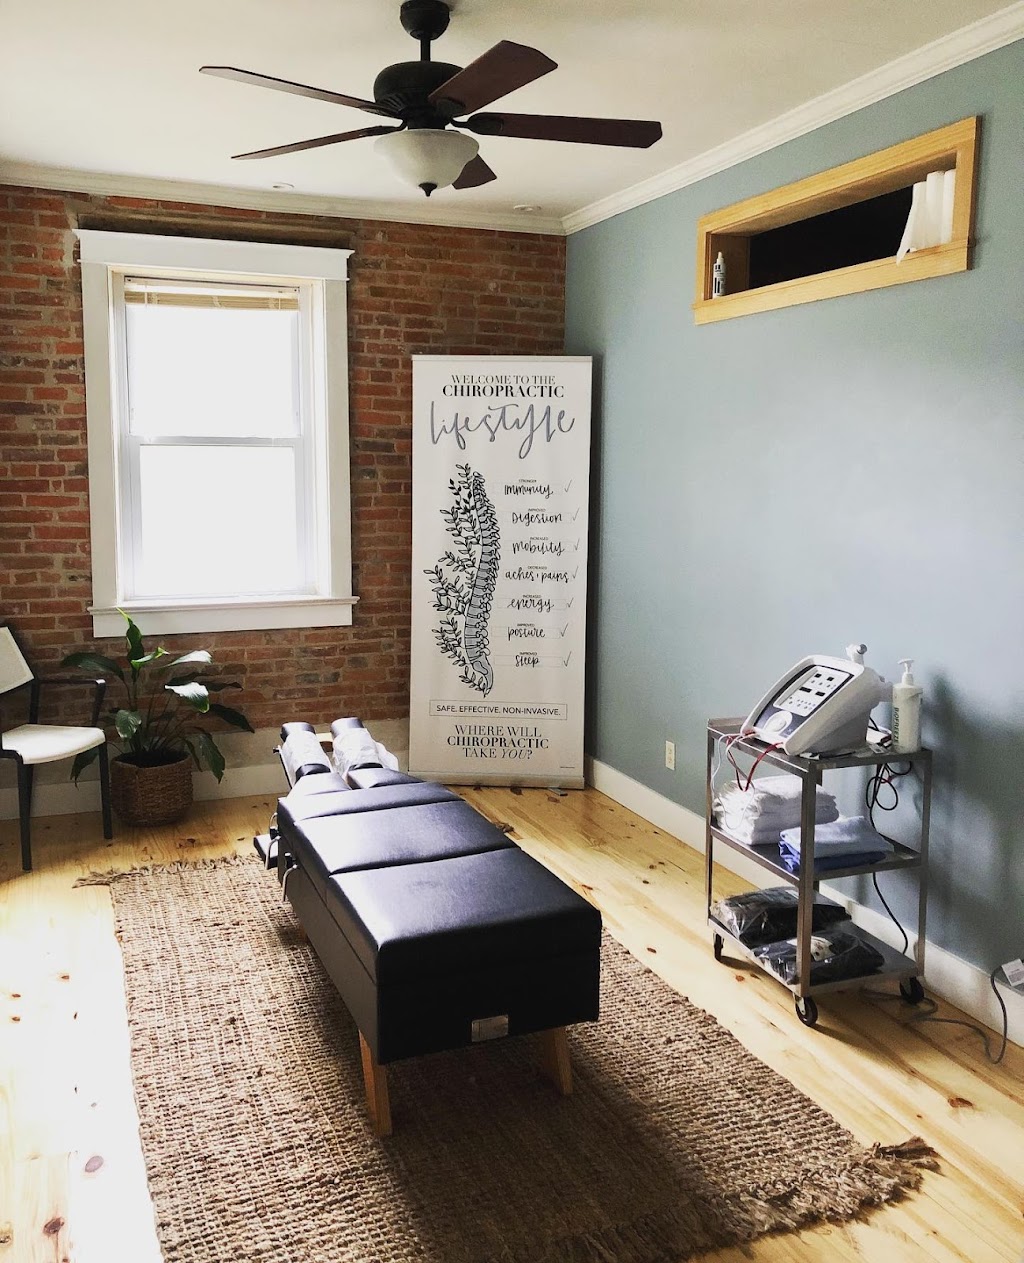 1880 Chiropractic & Acupuncture | 407 N Duncan St, Marine, IL 62061, USA | Phone: (618) 887-2017